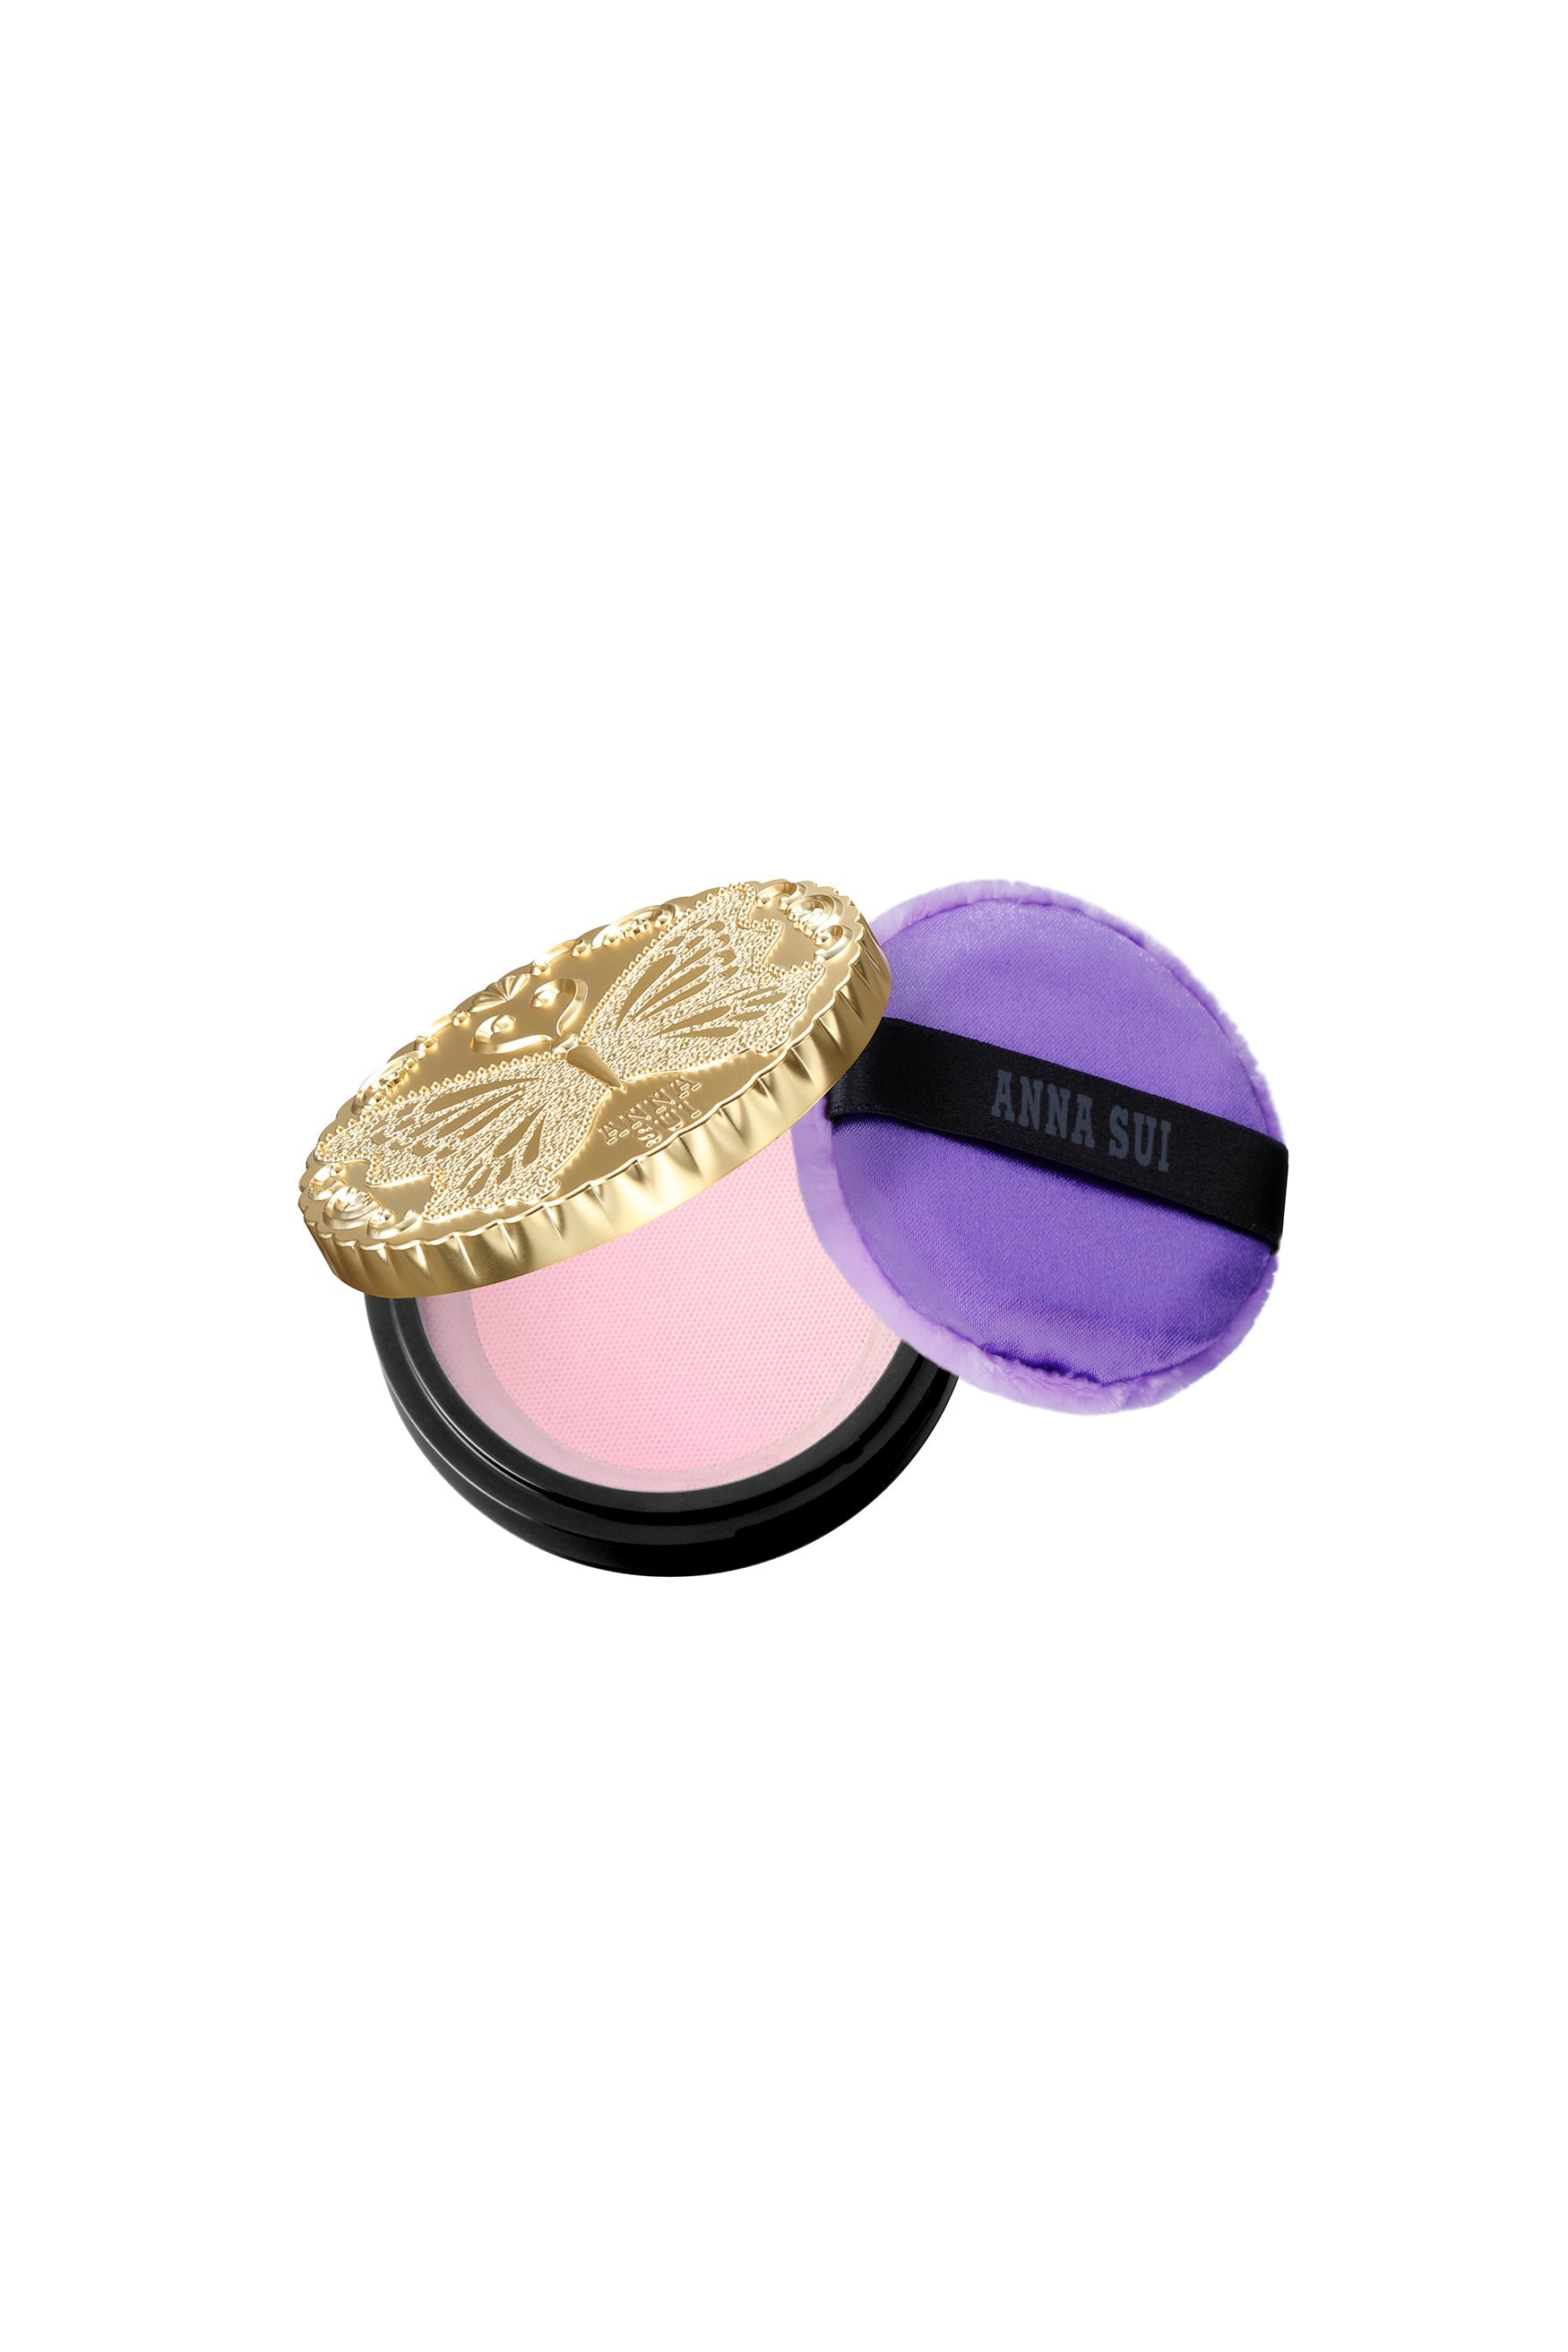 Classic Loose Powder gold round box with a butterfly engrave on top, 300: powder, and sponge